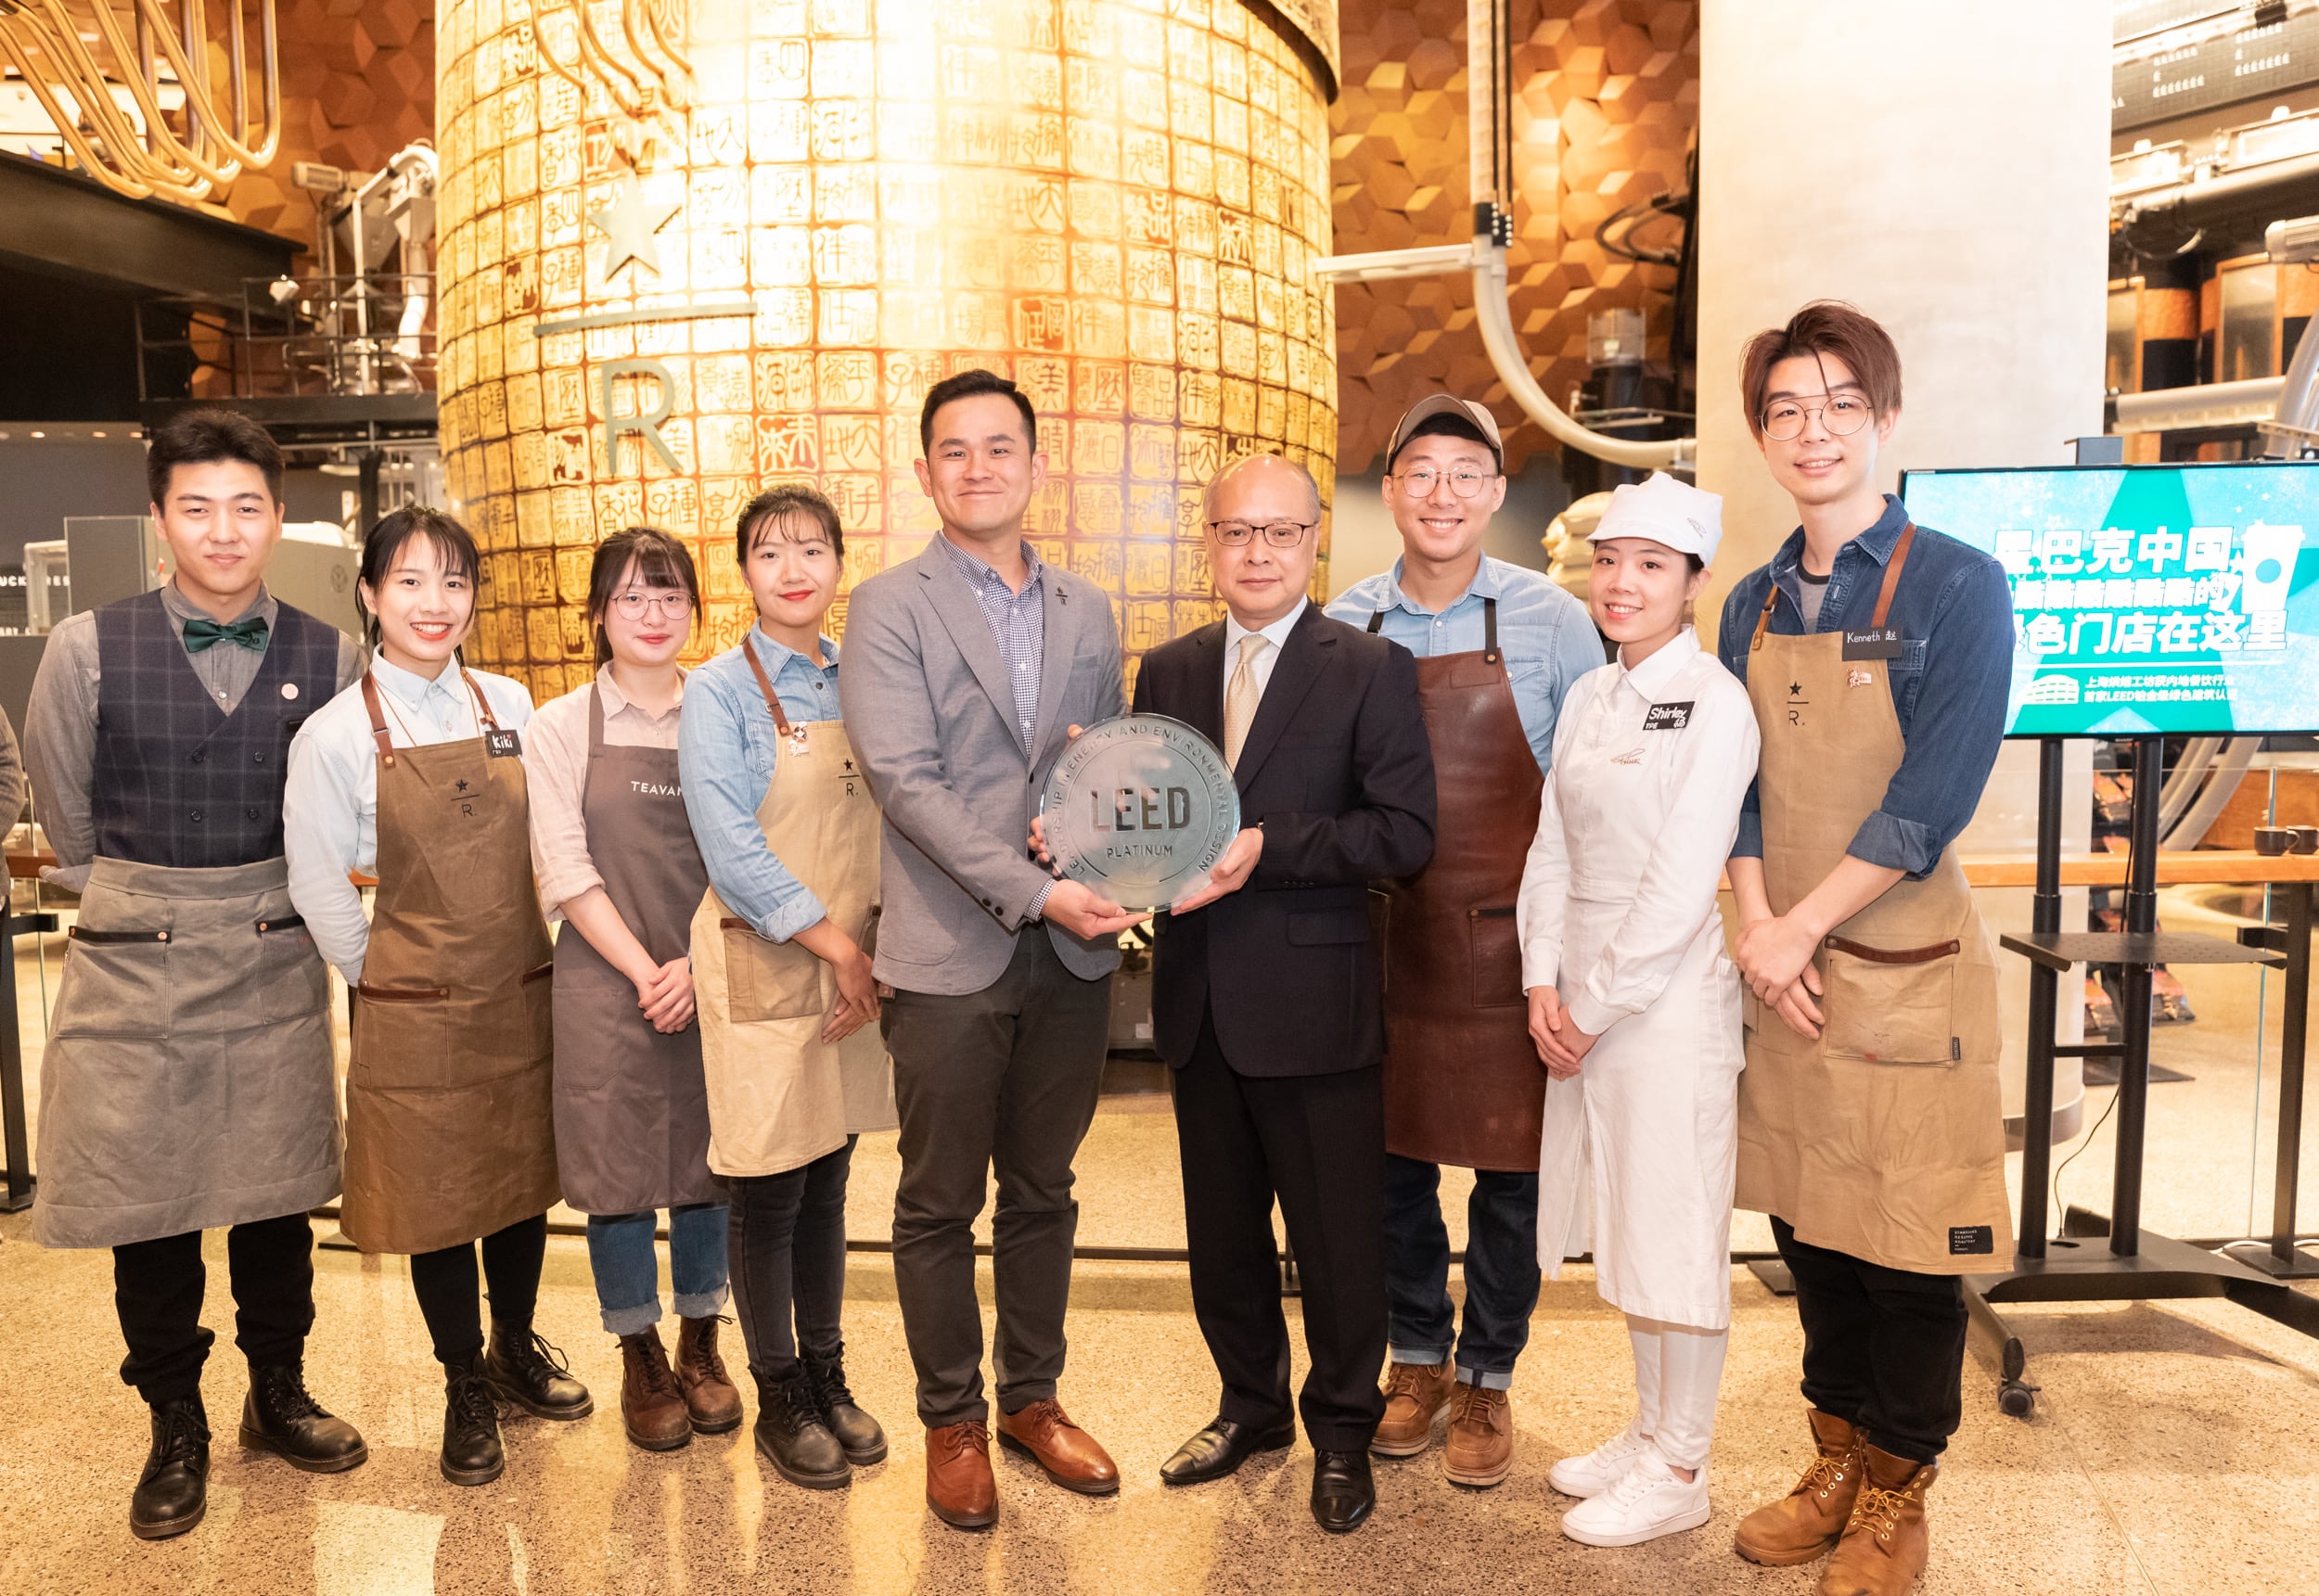 USGBC North Asia Region MD Andy To Handing over LEED Platinum plaque to Roastery partners